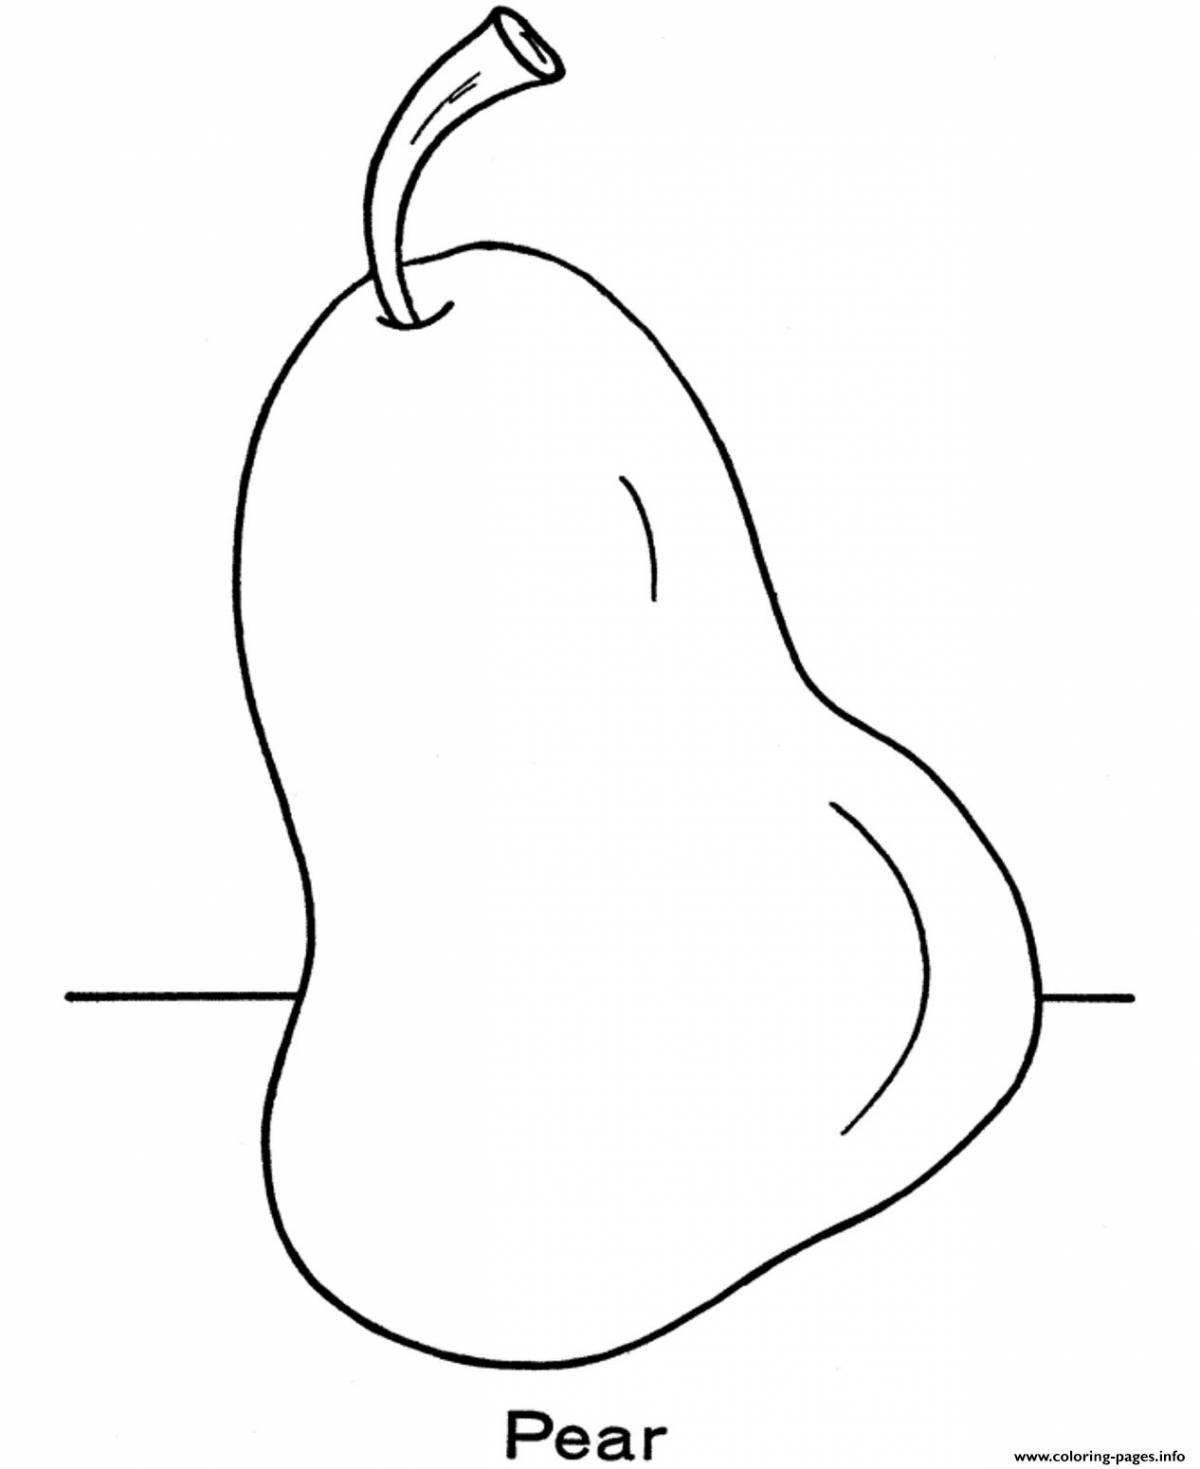 Fun apple pear coloring page